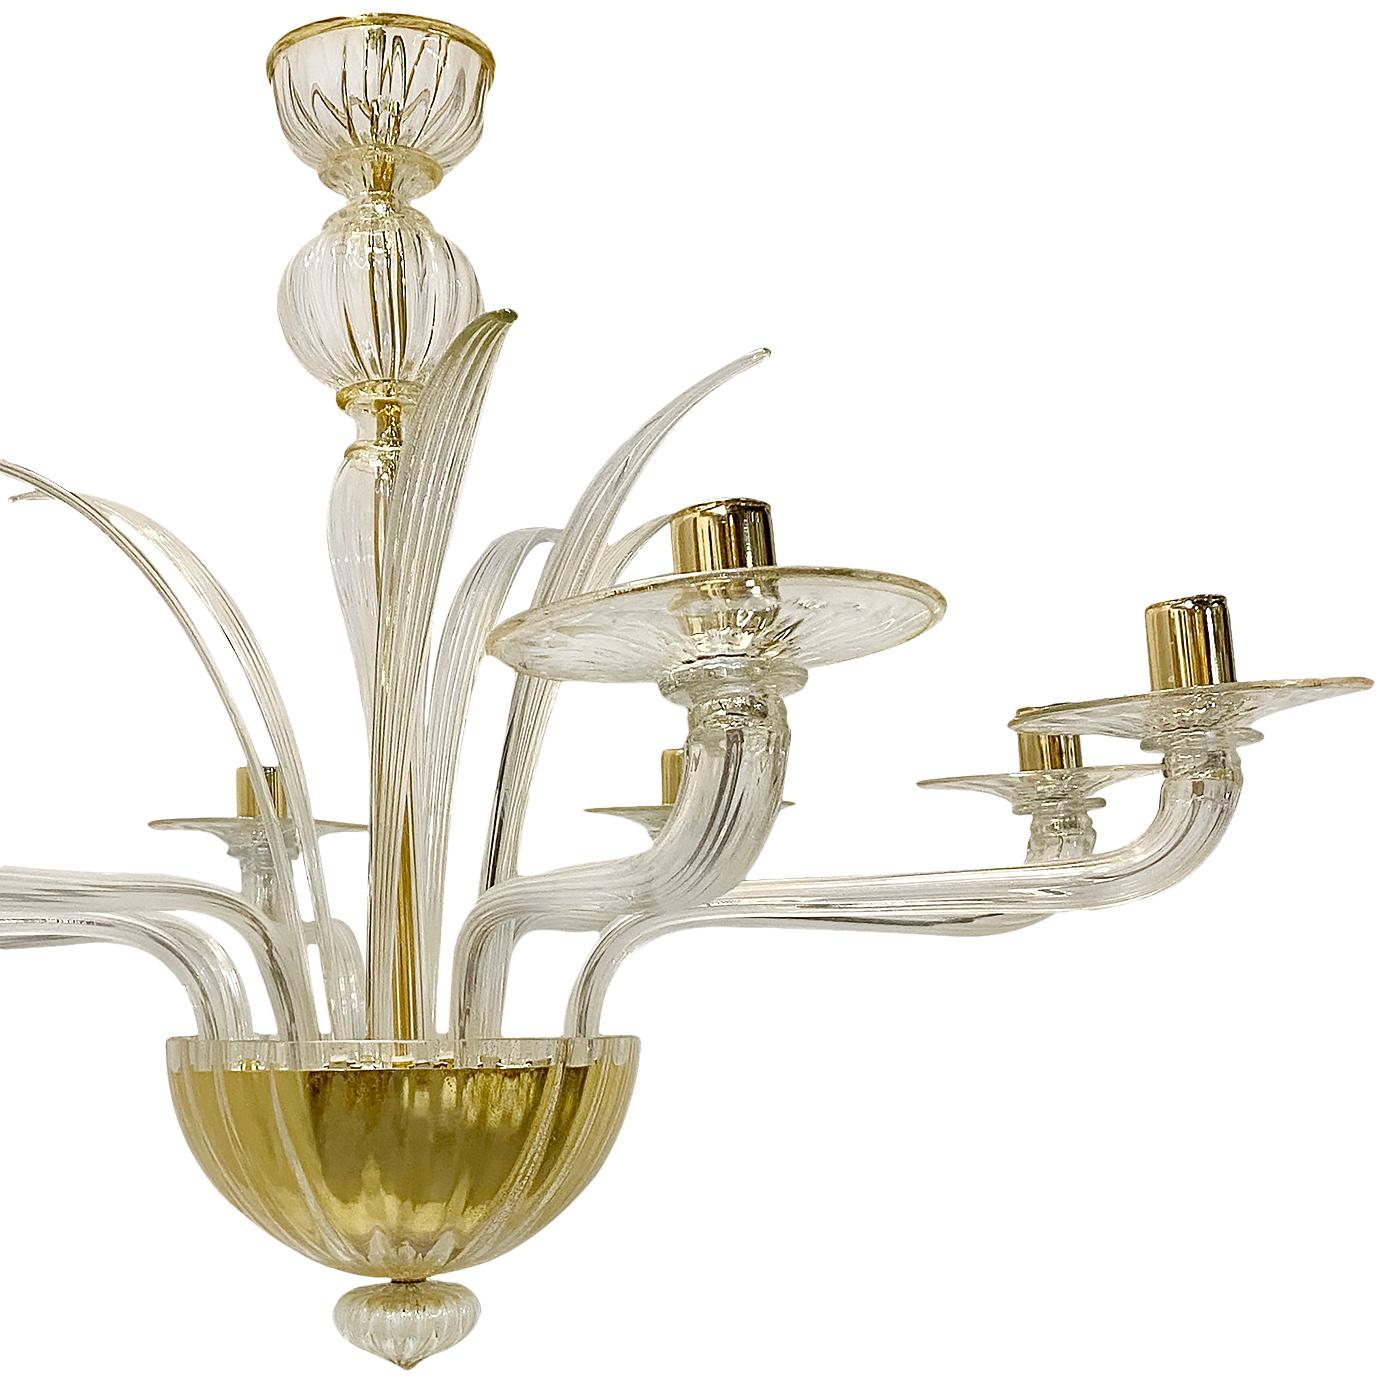 A circa 1960's Italian six-arm glass chandelier with gold insets in glass.

Measurements:
Diameter: 38